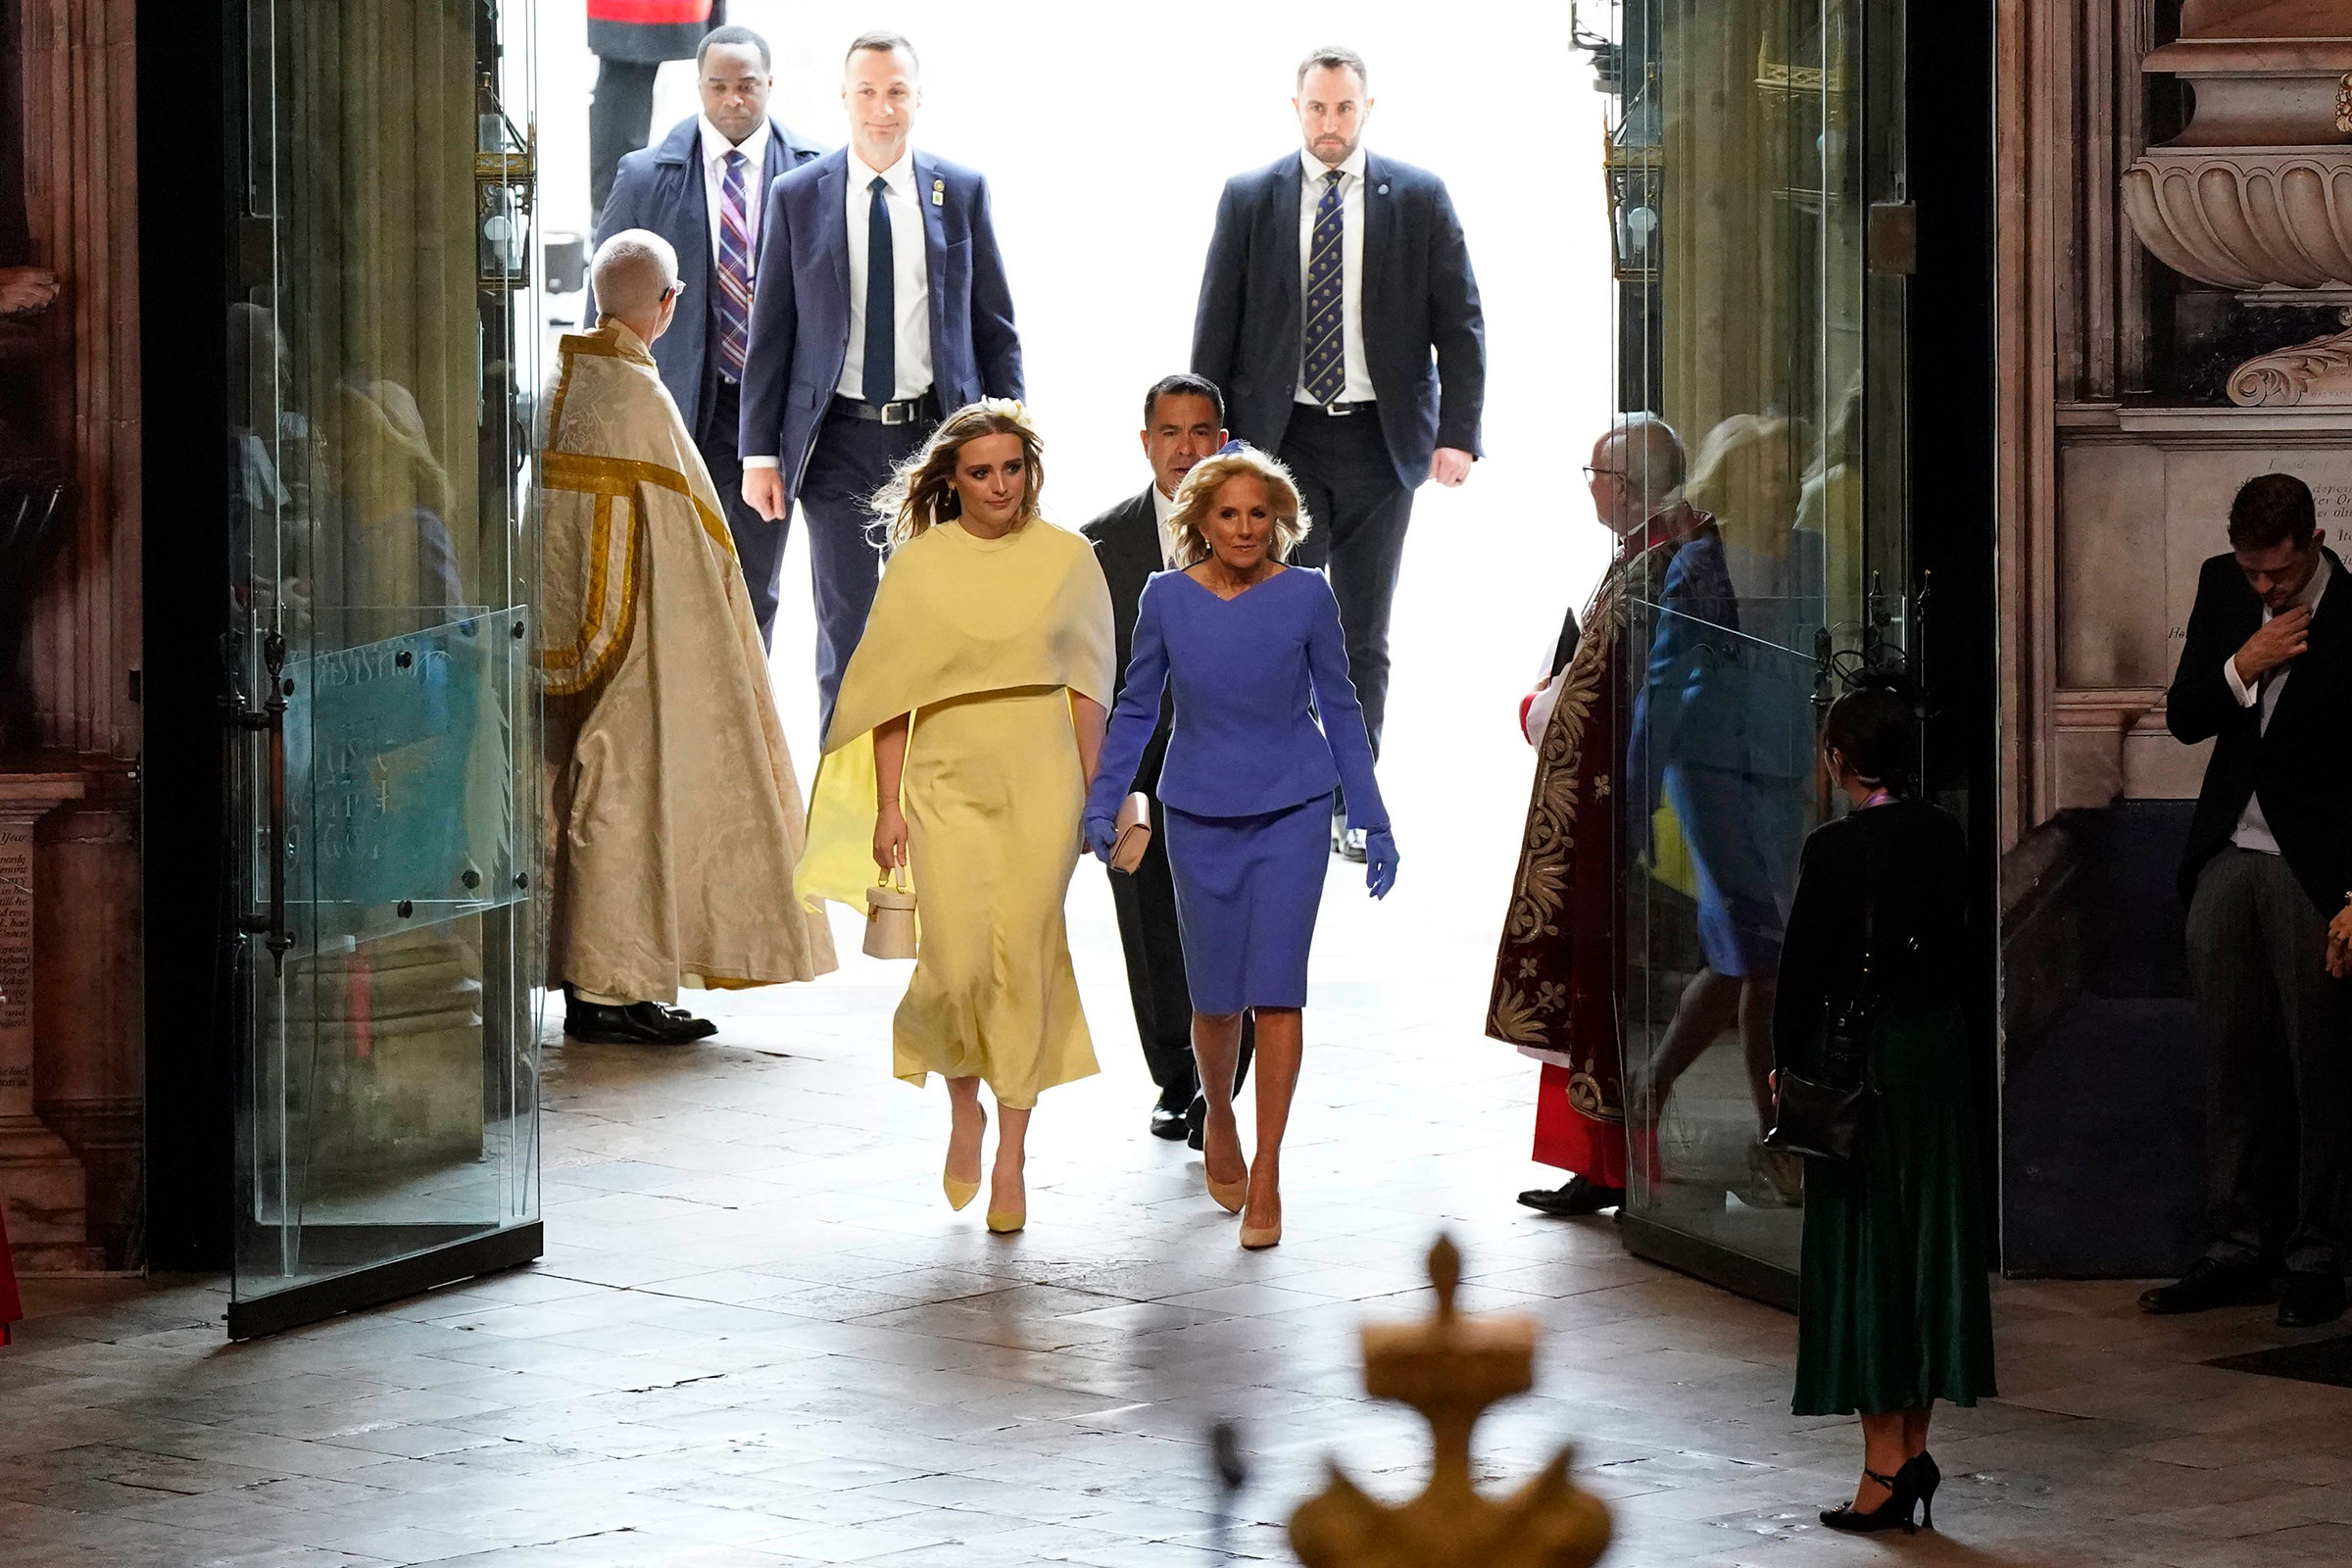 First Lady of the United States, Jill Biden, and her granddaughter Finnegan Biden arrive at Westminster Abbey. (Andrew Matthews—WPA Pool/Getty Images)